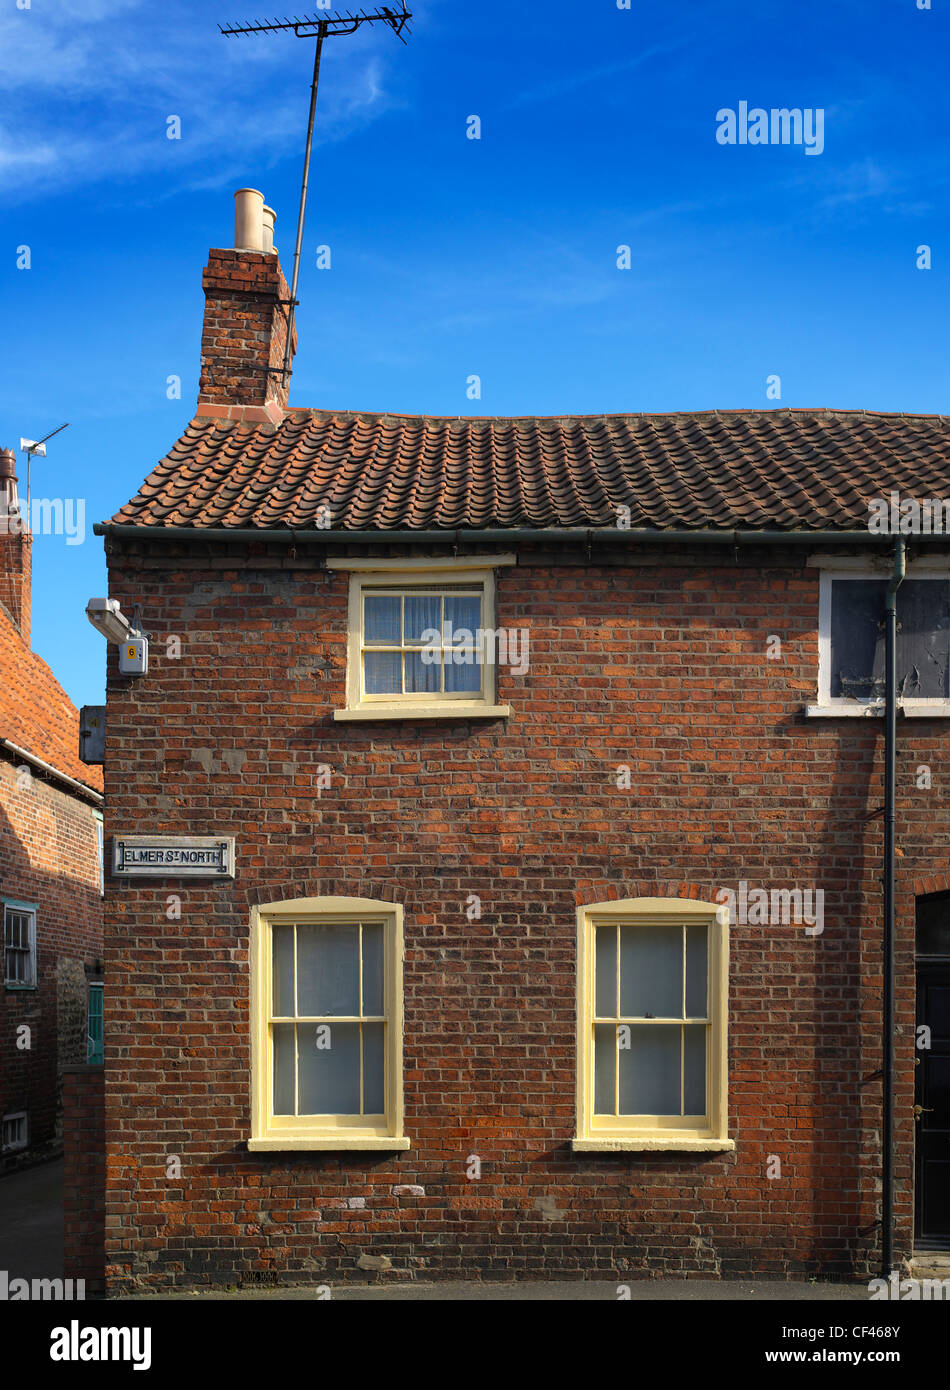 Exterior of a redbrick terraced cottage in Grantham. This is typical of old terraced mid-England worker's cottages found in many Stock Photo